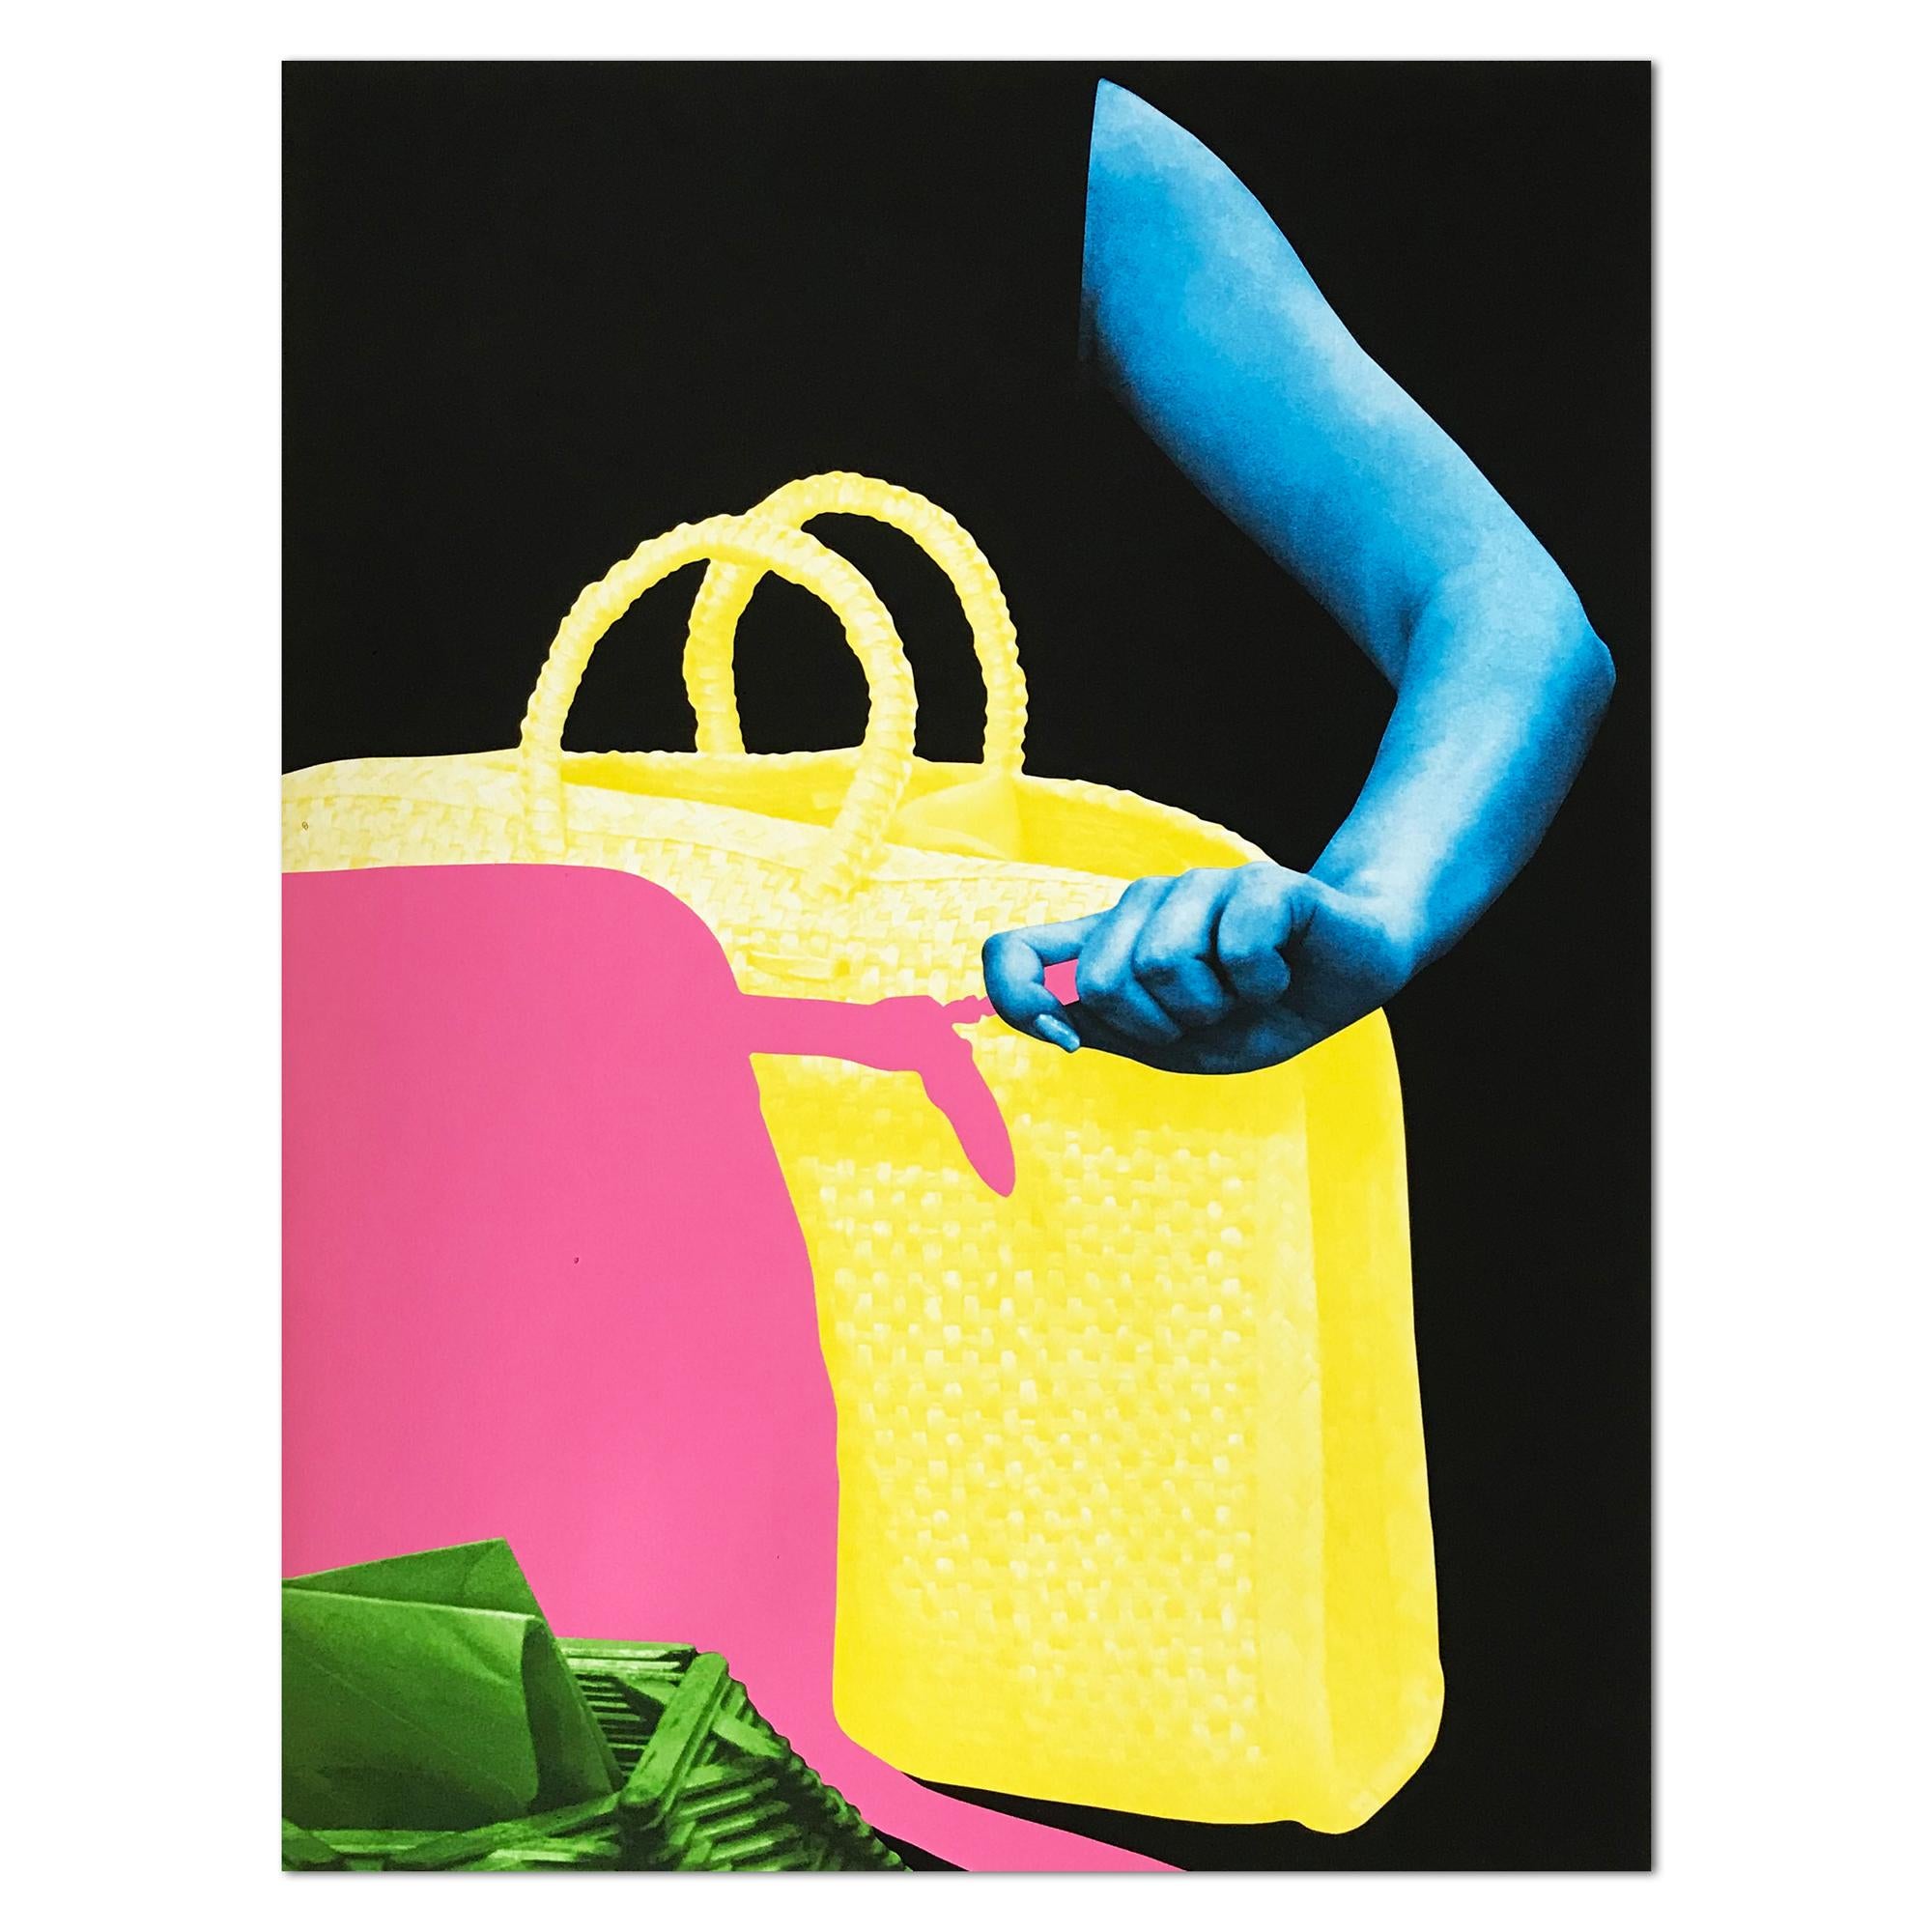 John Baldessari (American, born 1931)
Two Bags and Envelope Holder, 2011
Medium: Archival inkjet print
Dimensions: 61 x 45.8 cm
Edition of 40: Hand signed and numbered
Condition: Excellent